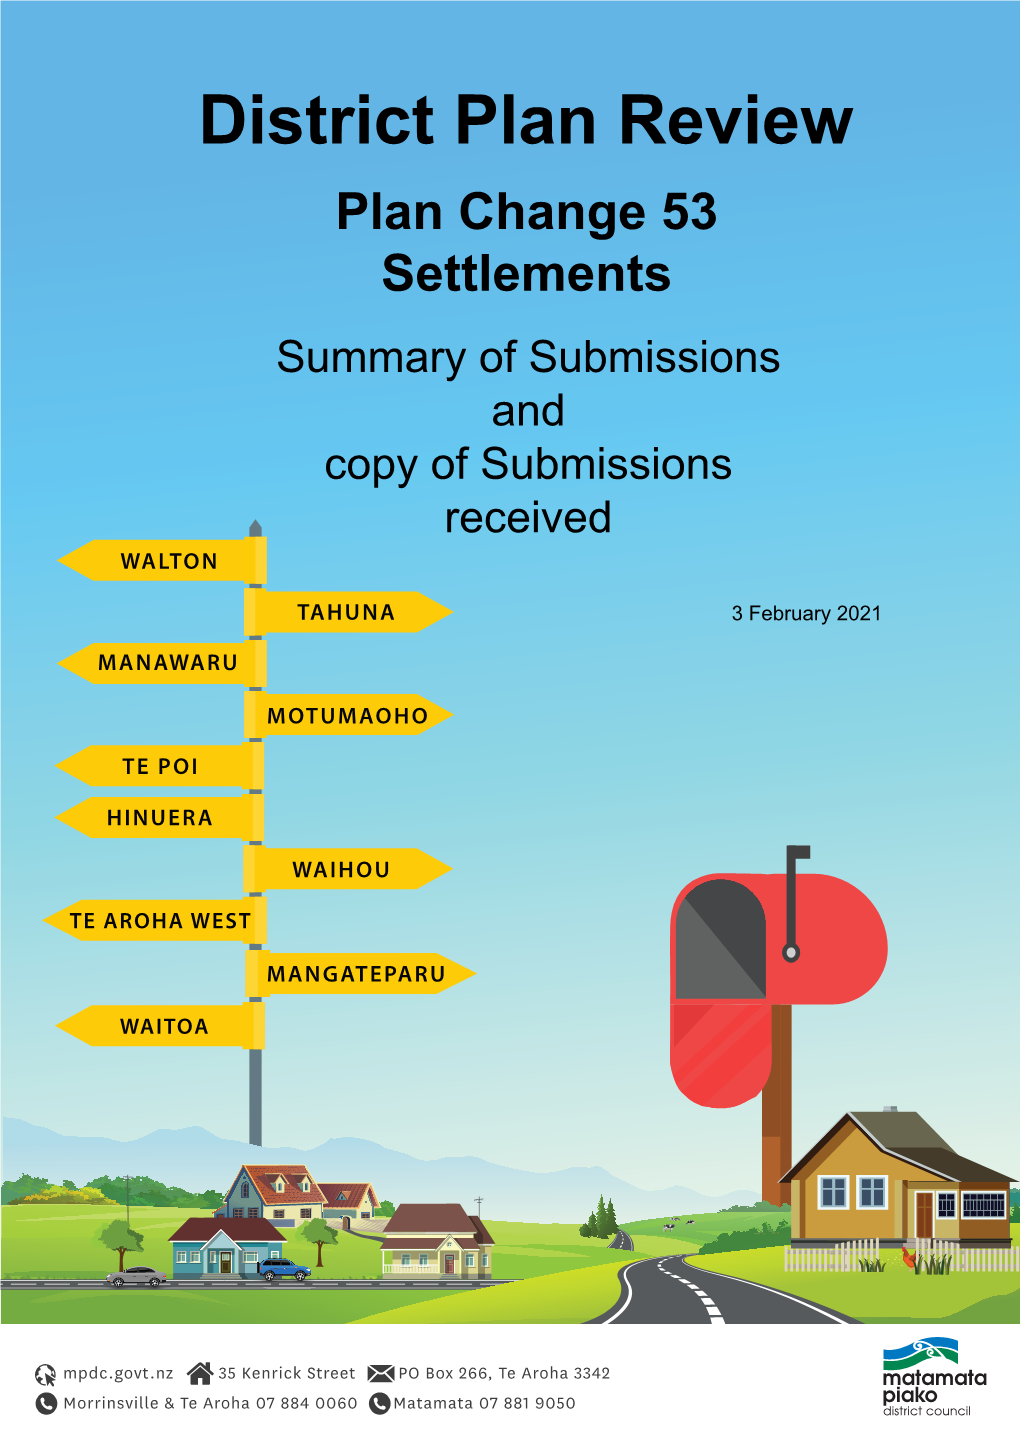 Plan Change 53 Settlements Summary of Submissions and Copy of Submissions Received WALTON